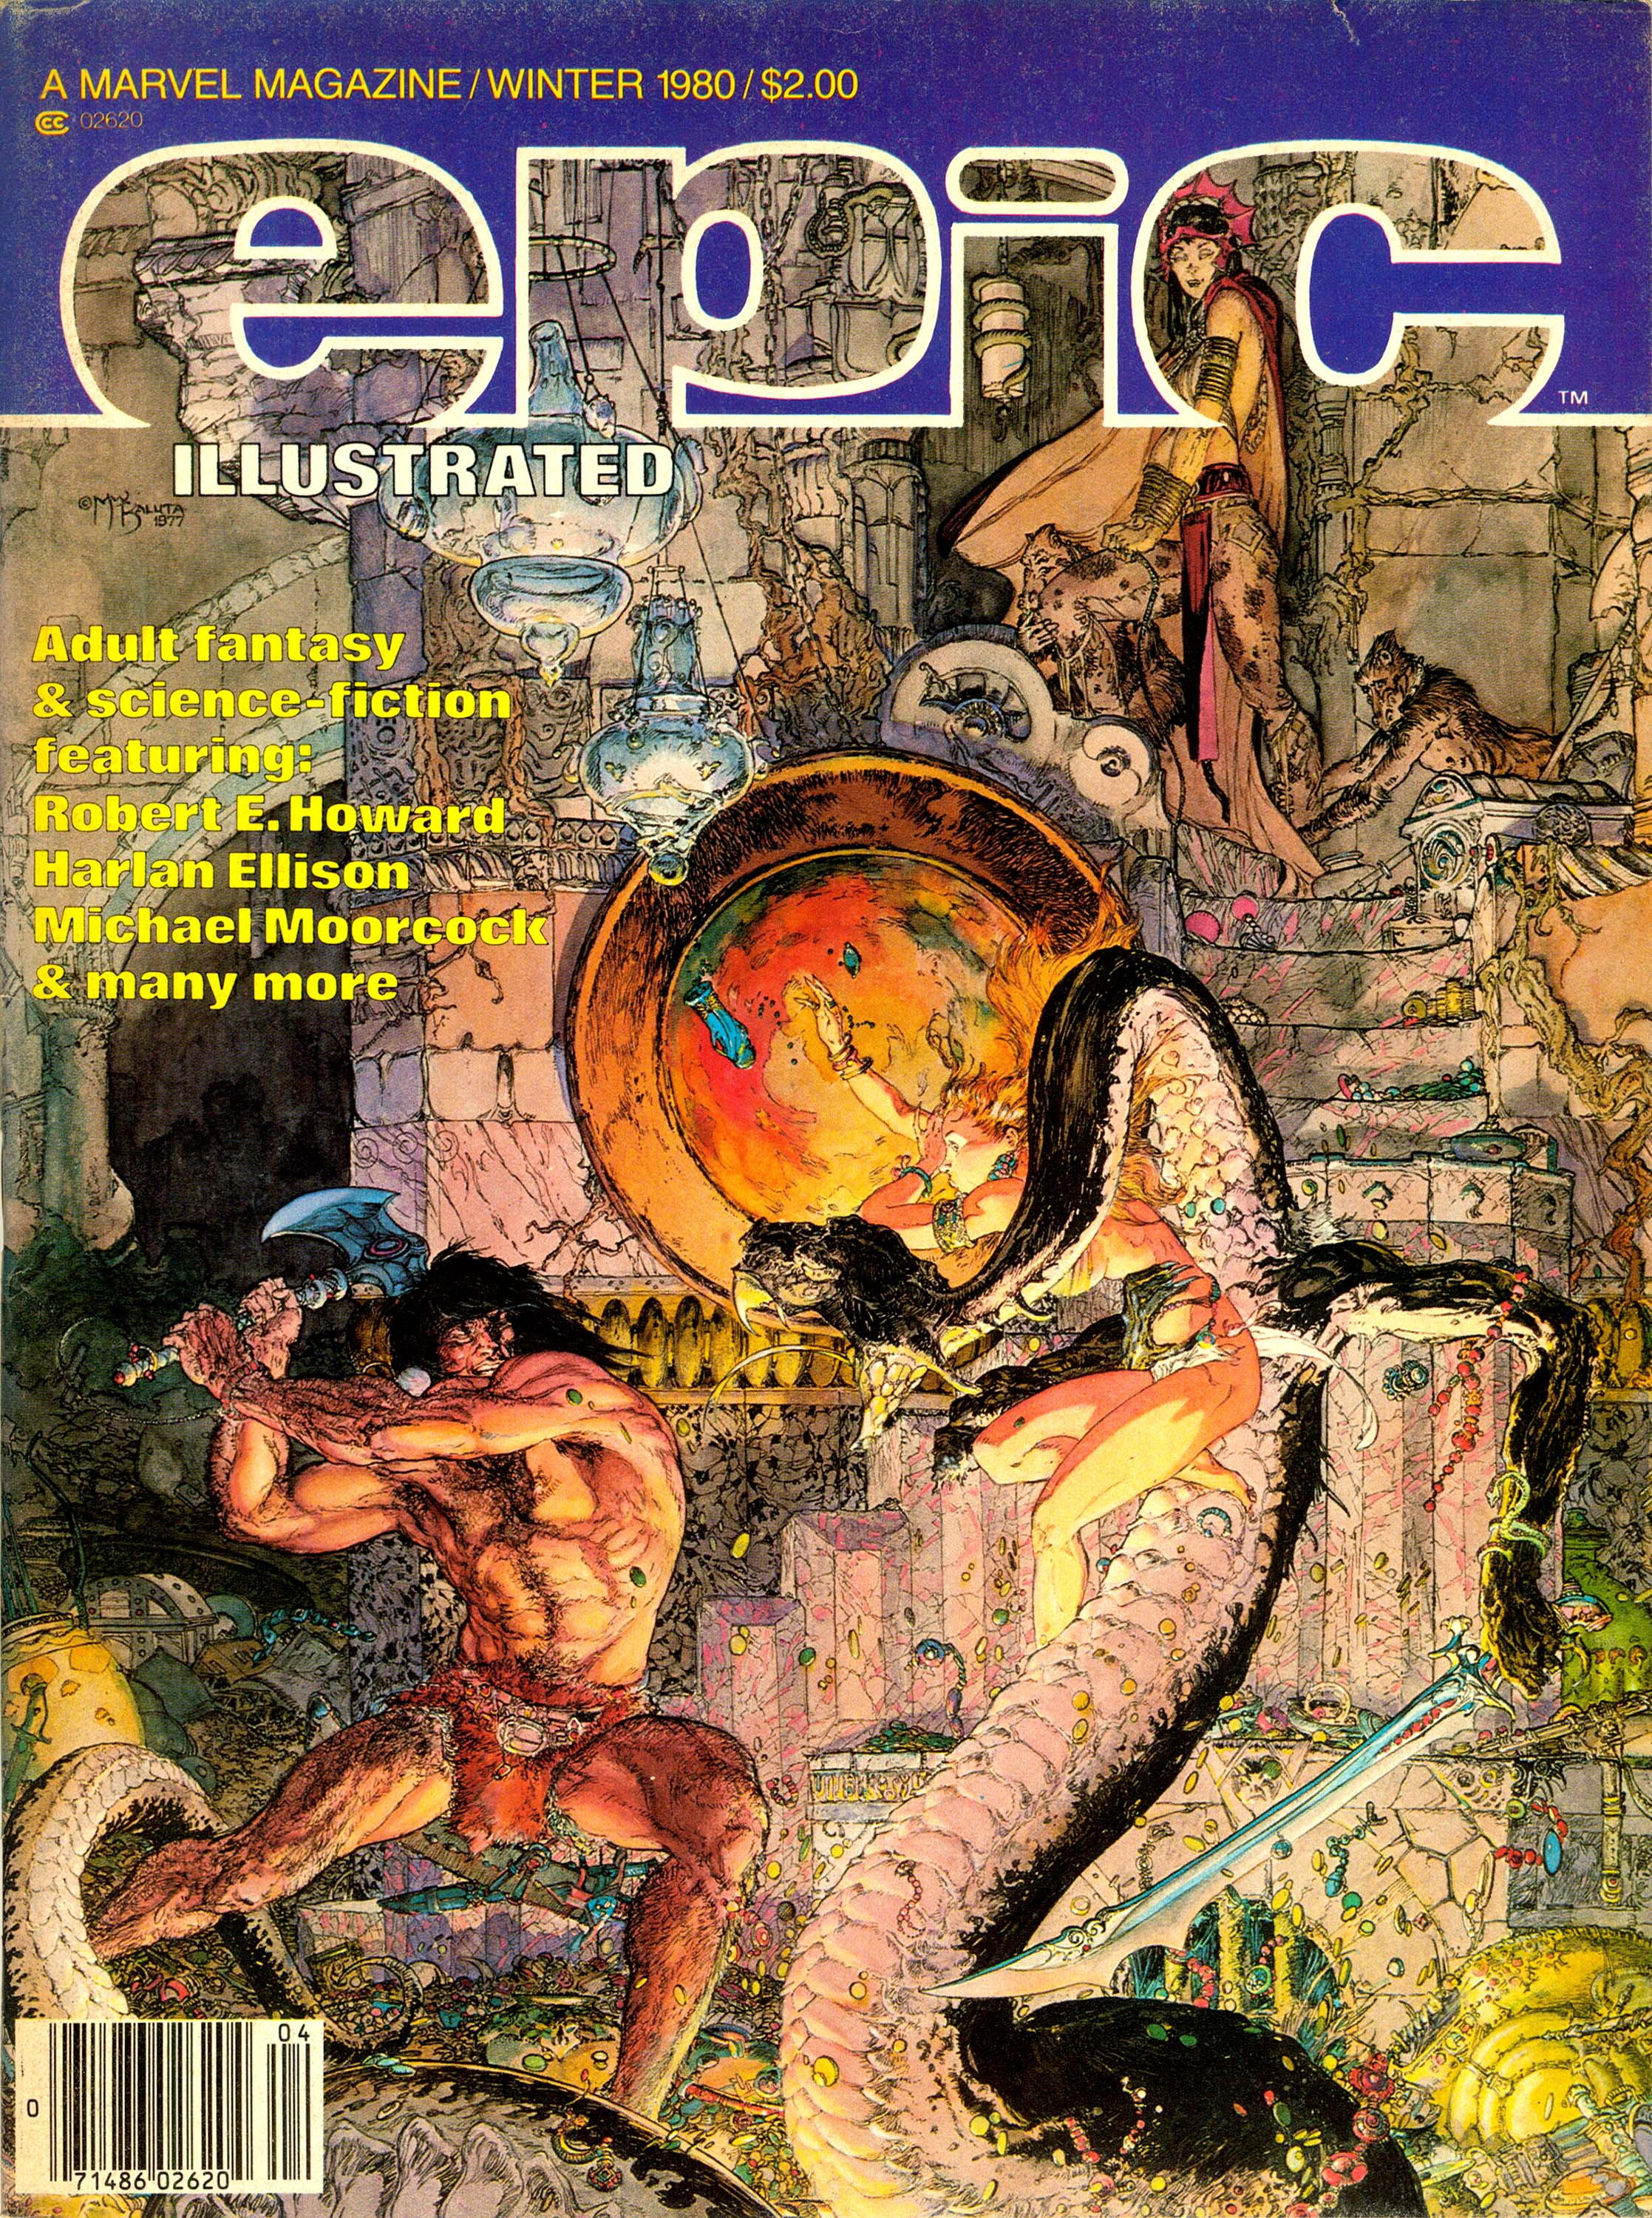 Epic Illustrated #4, cover, art by Michael Whelan